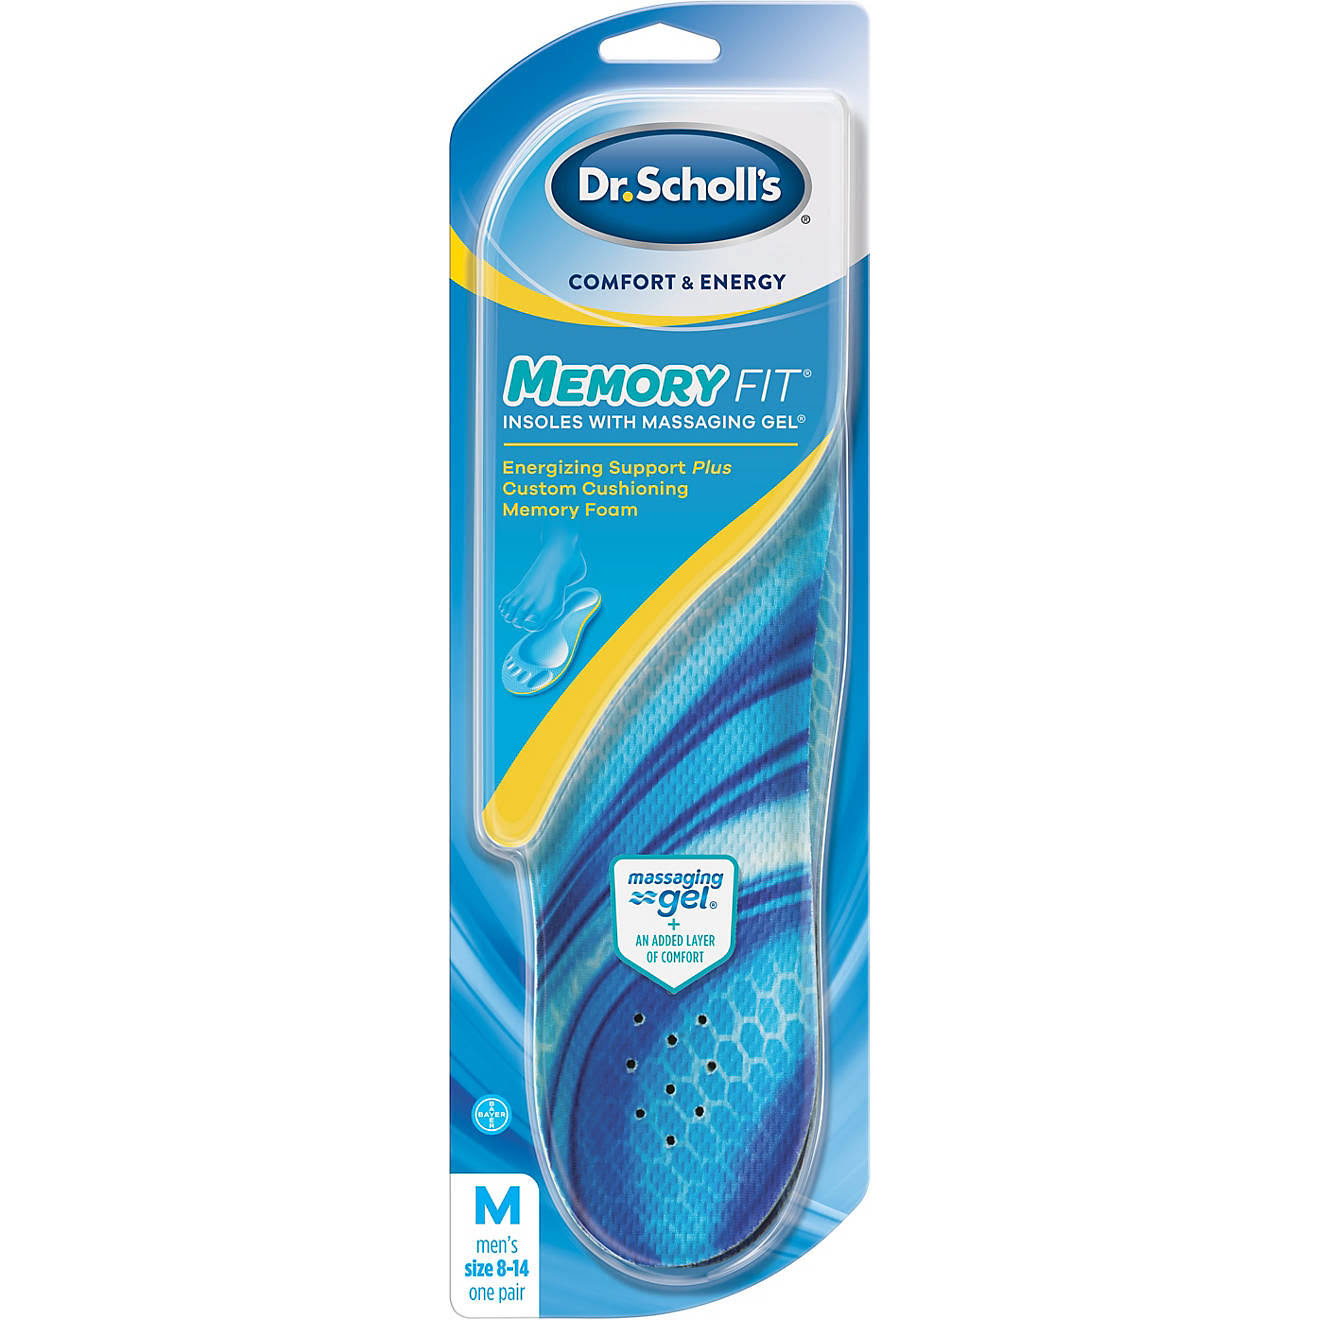 Dr. Scholl's Comfort and Energy Memory Fit Insoles For Men 1 Pair Size 8-14